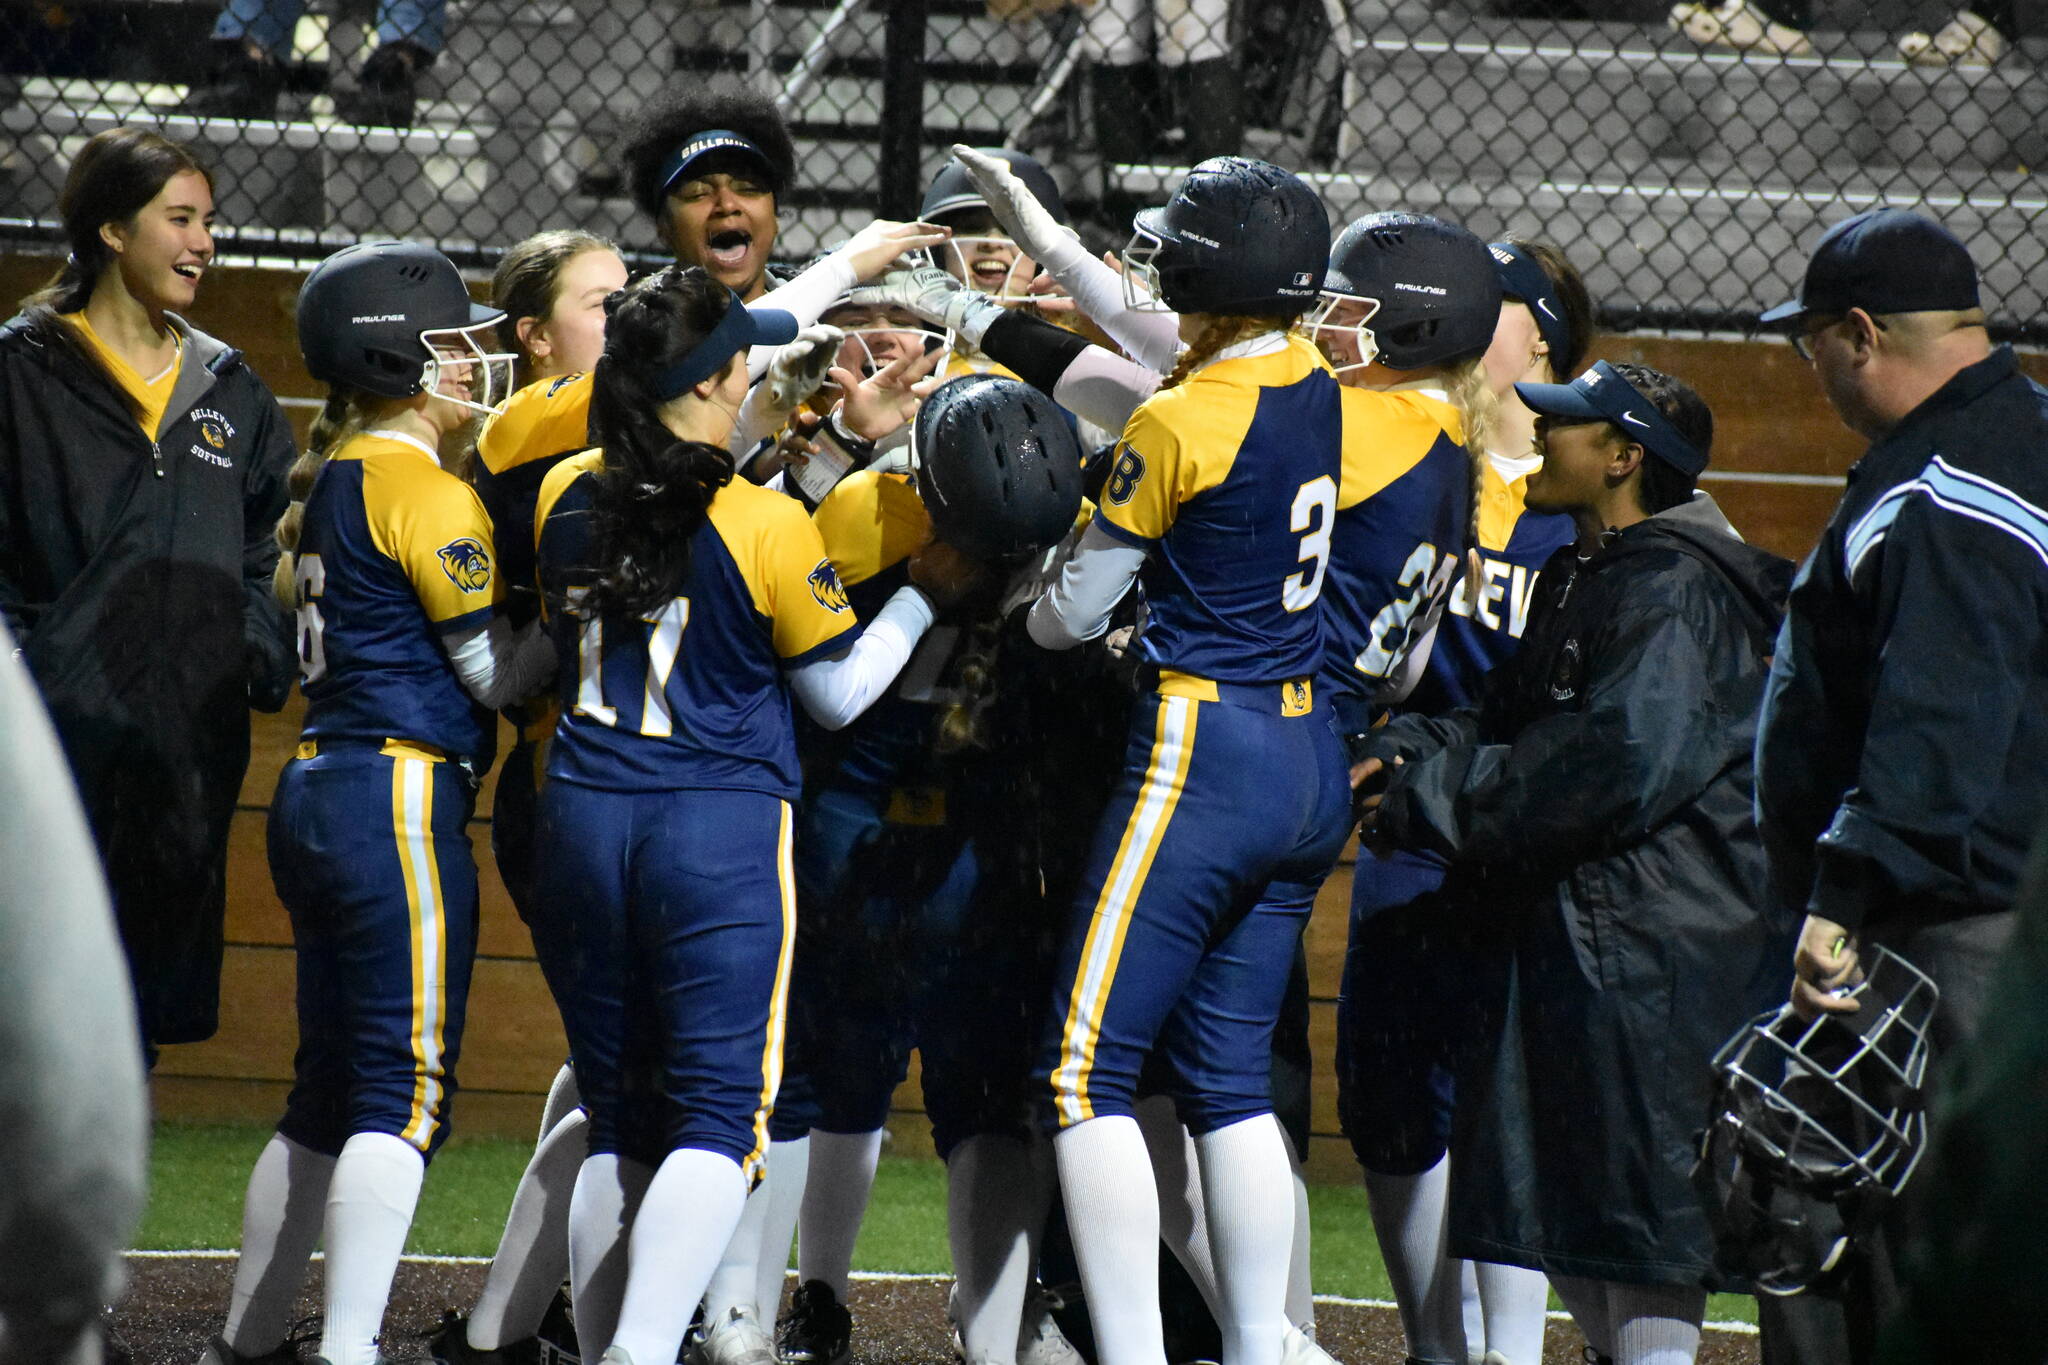 Bellevue celebrates a grand slam in the fifth inning. Ben Ray / The Reporter